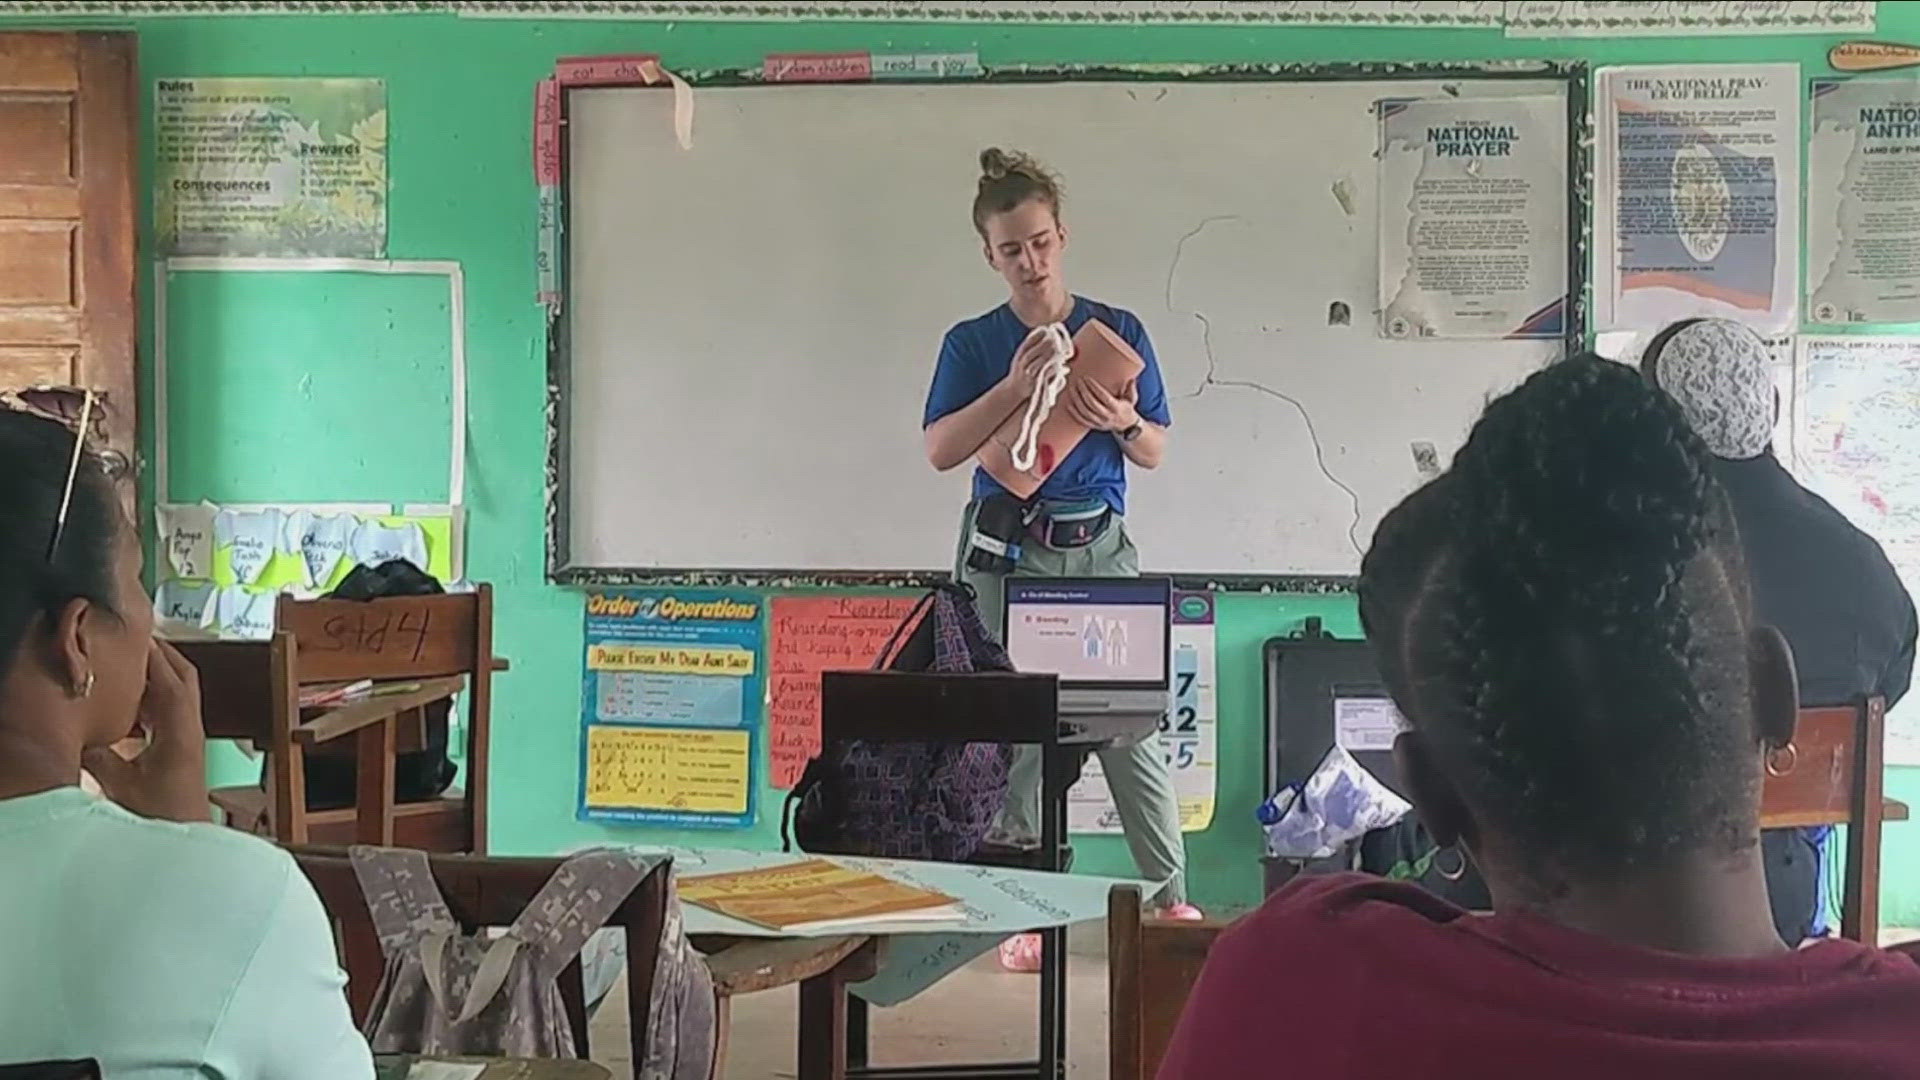 Second year medical student Rachel Yerden was among several who traveled to Belize this spring, to train farmers how to treat injuries while on the job.